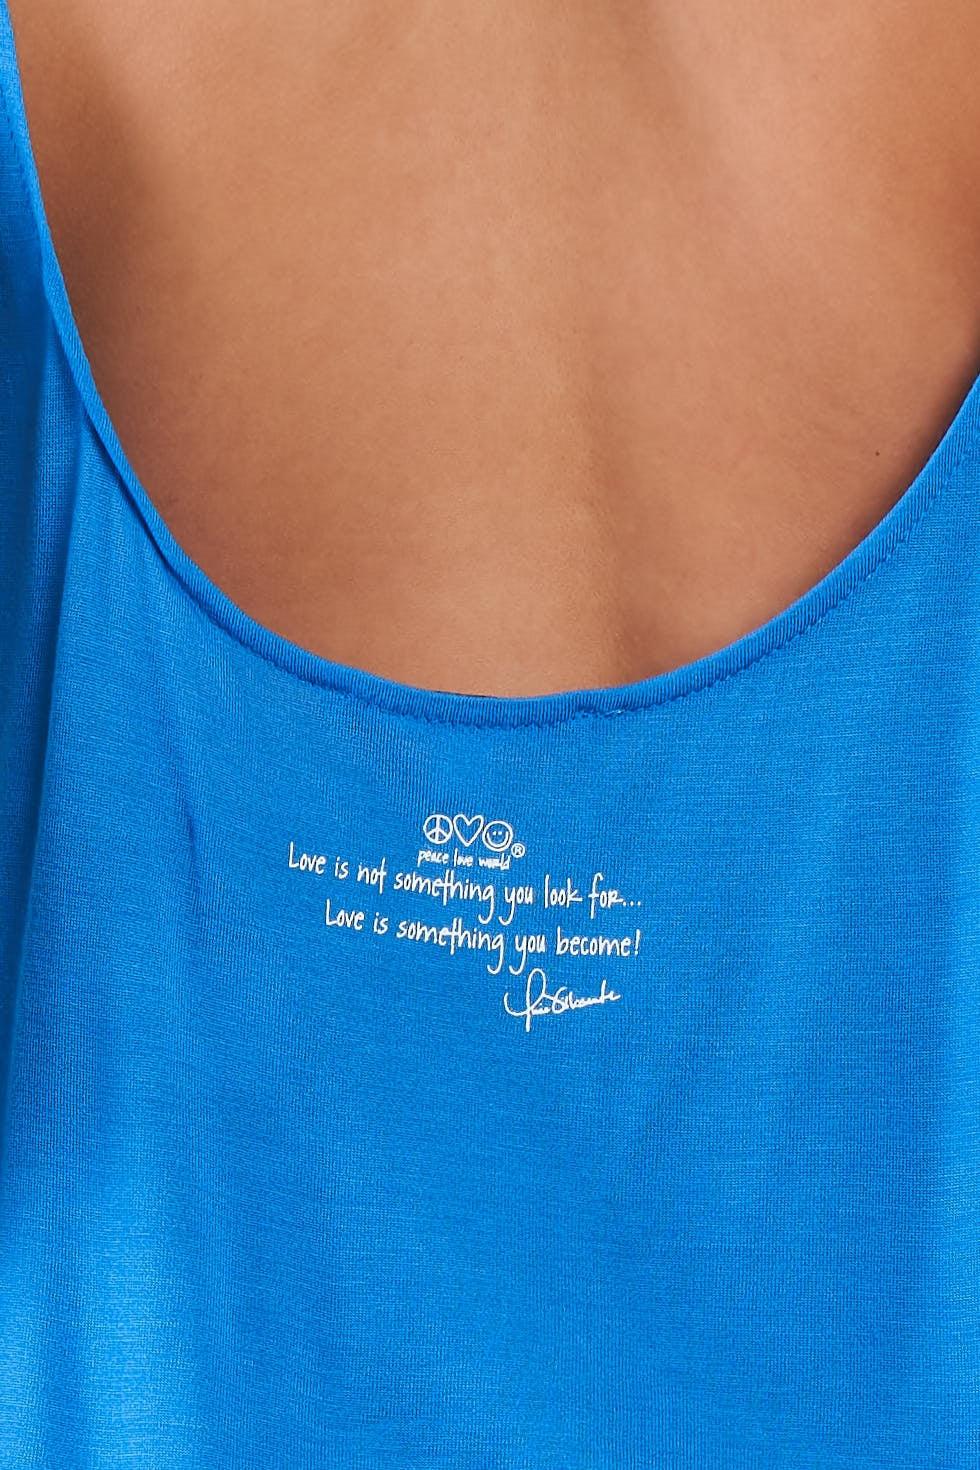 French Blue Sleeveless "Love Anchor, The Soul" Scoop Neck Tank Top